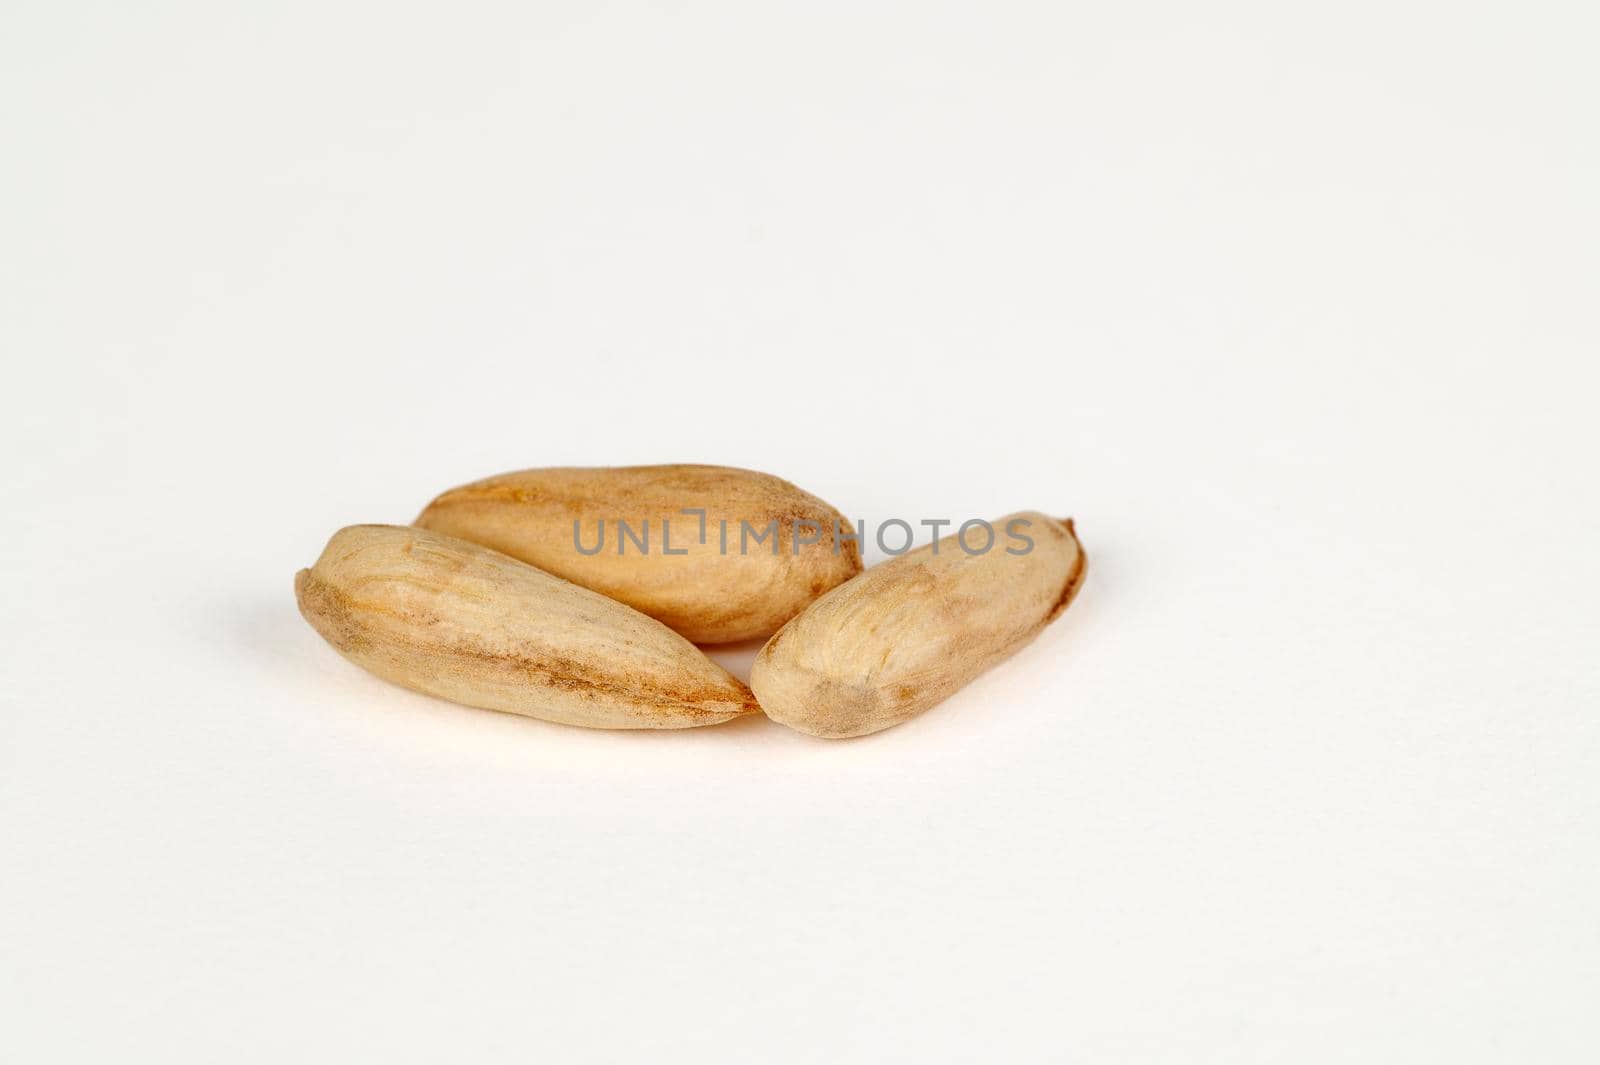 Closeup view of three wild papershell almonds 'kaymak' on a white background